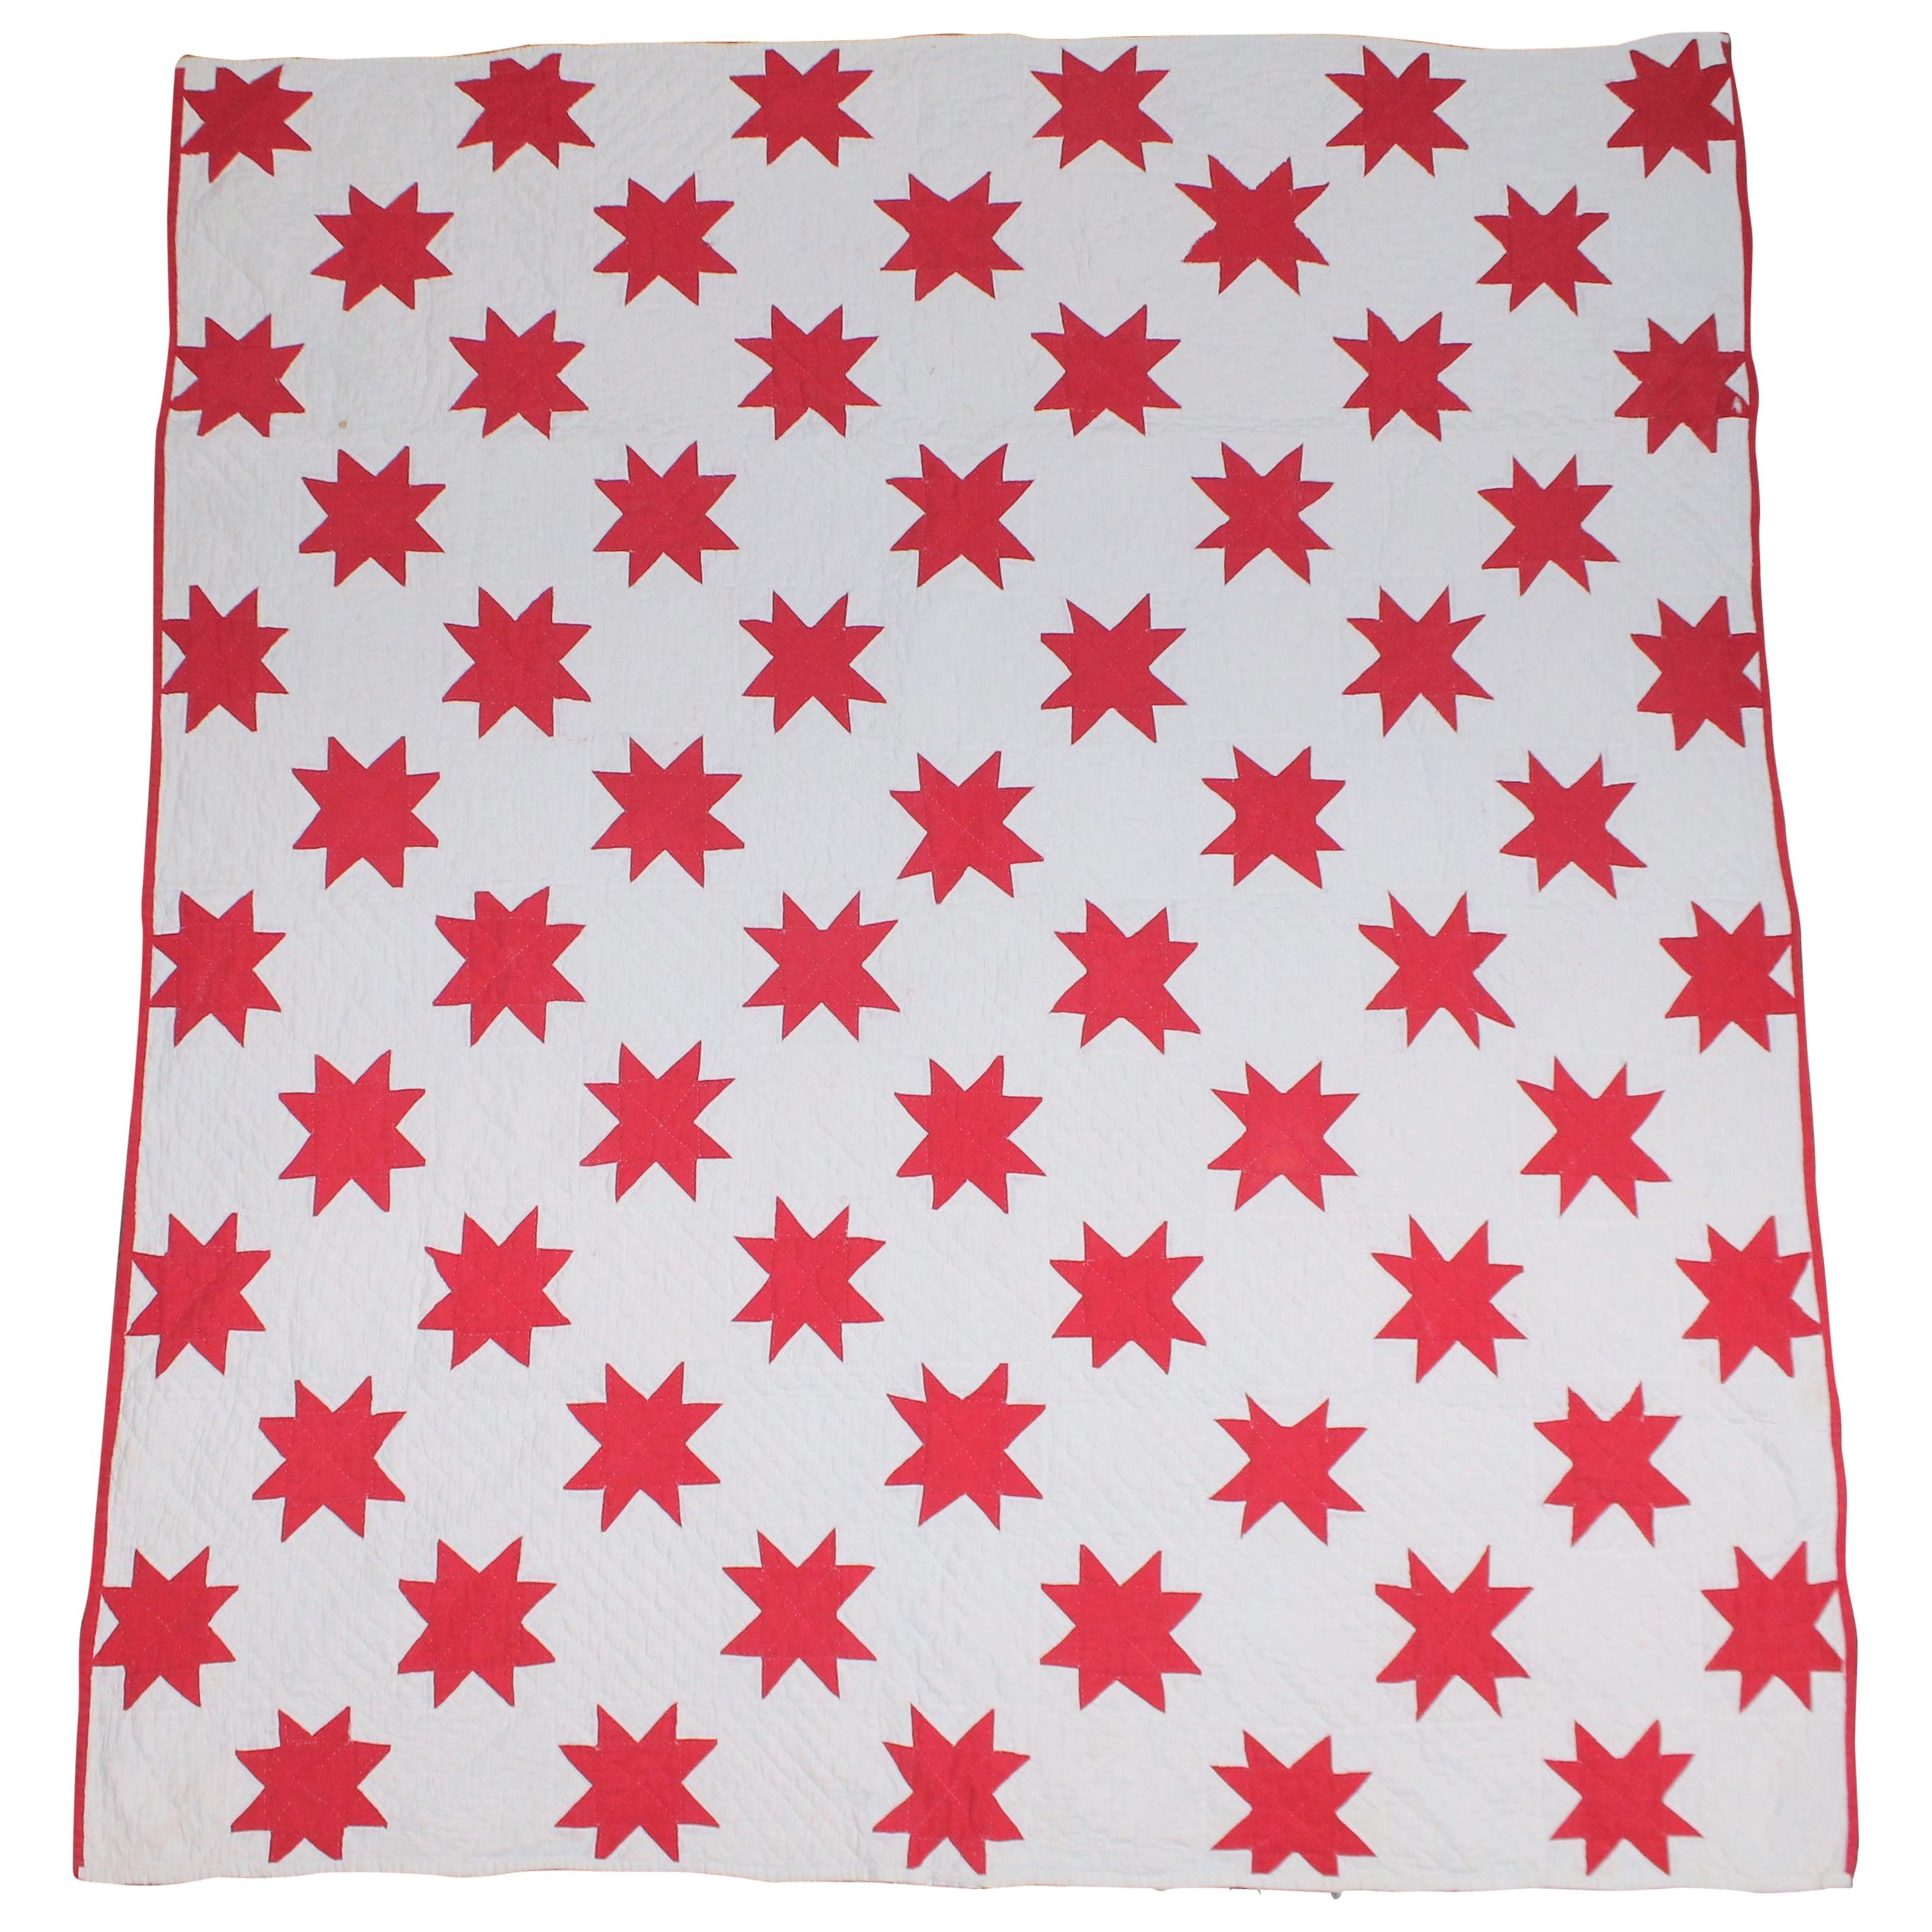 Antique Quilt, Red and White Stars Quilt